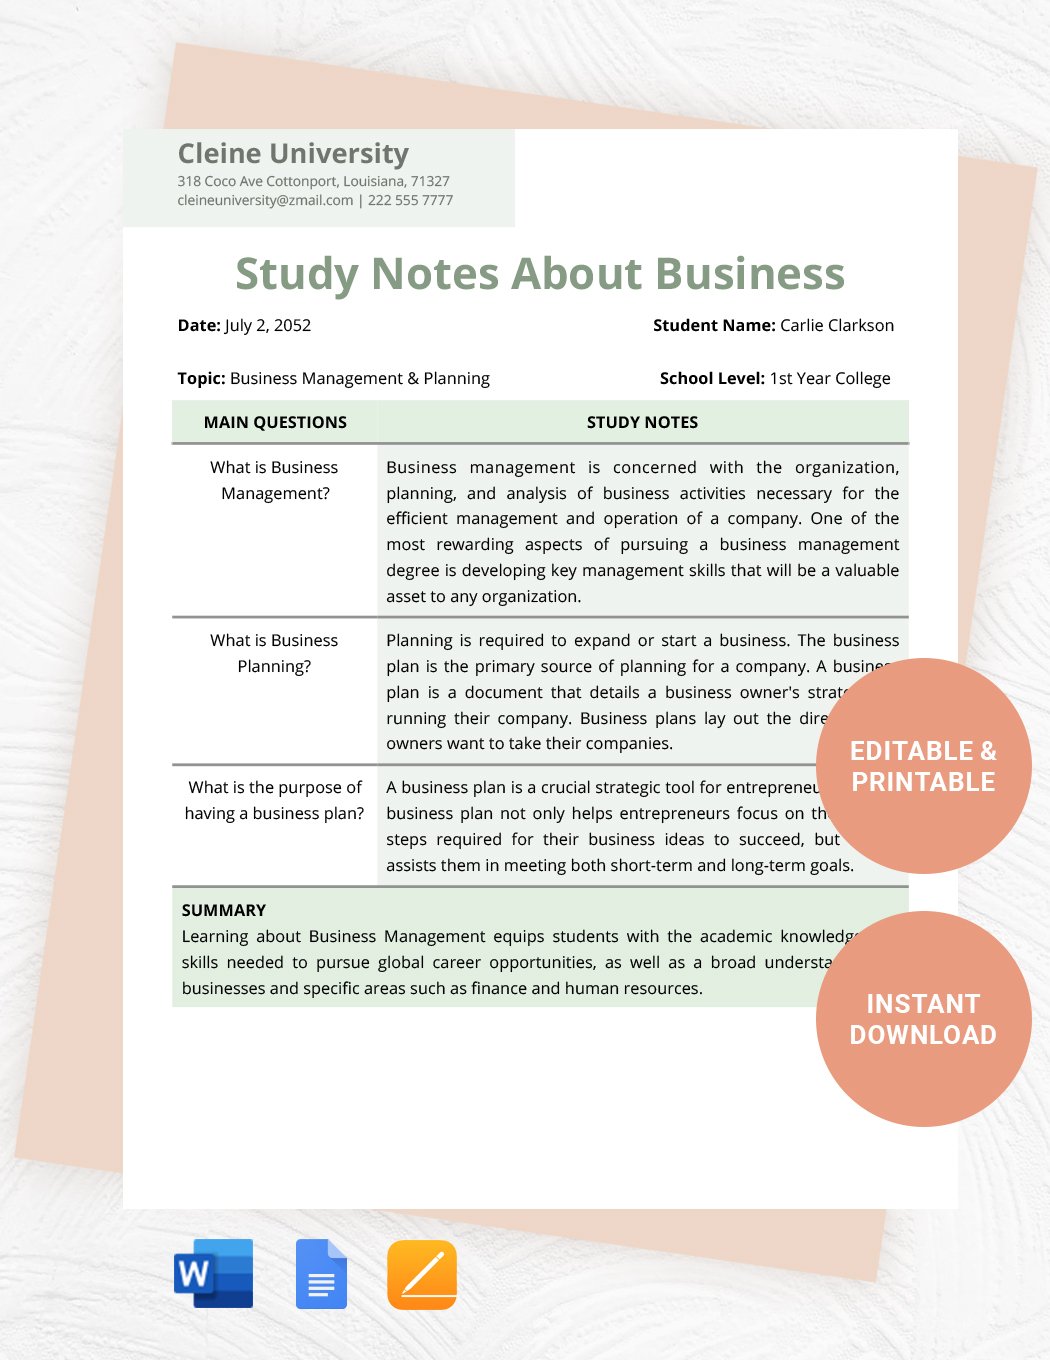 Free Digital Note Taking Template Download in Word, Google Docs